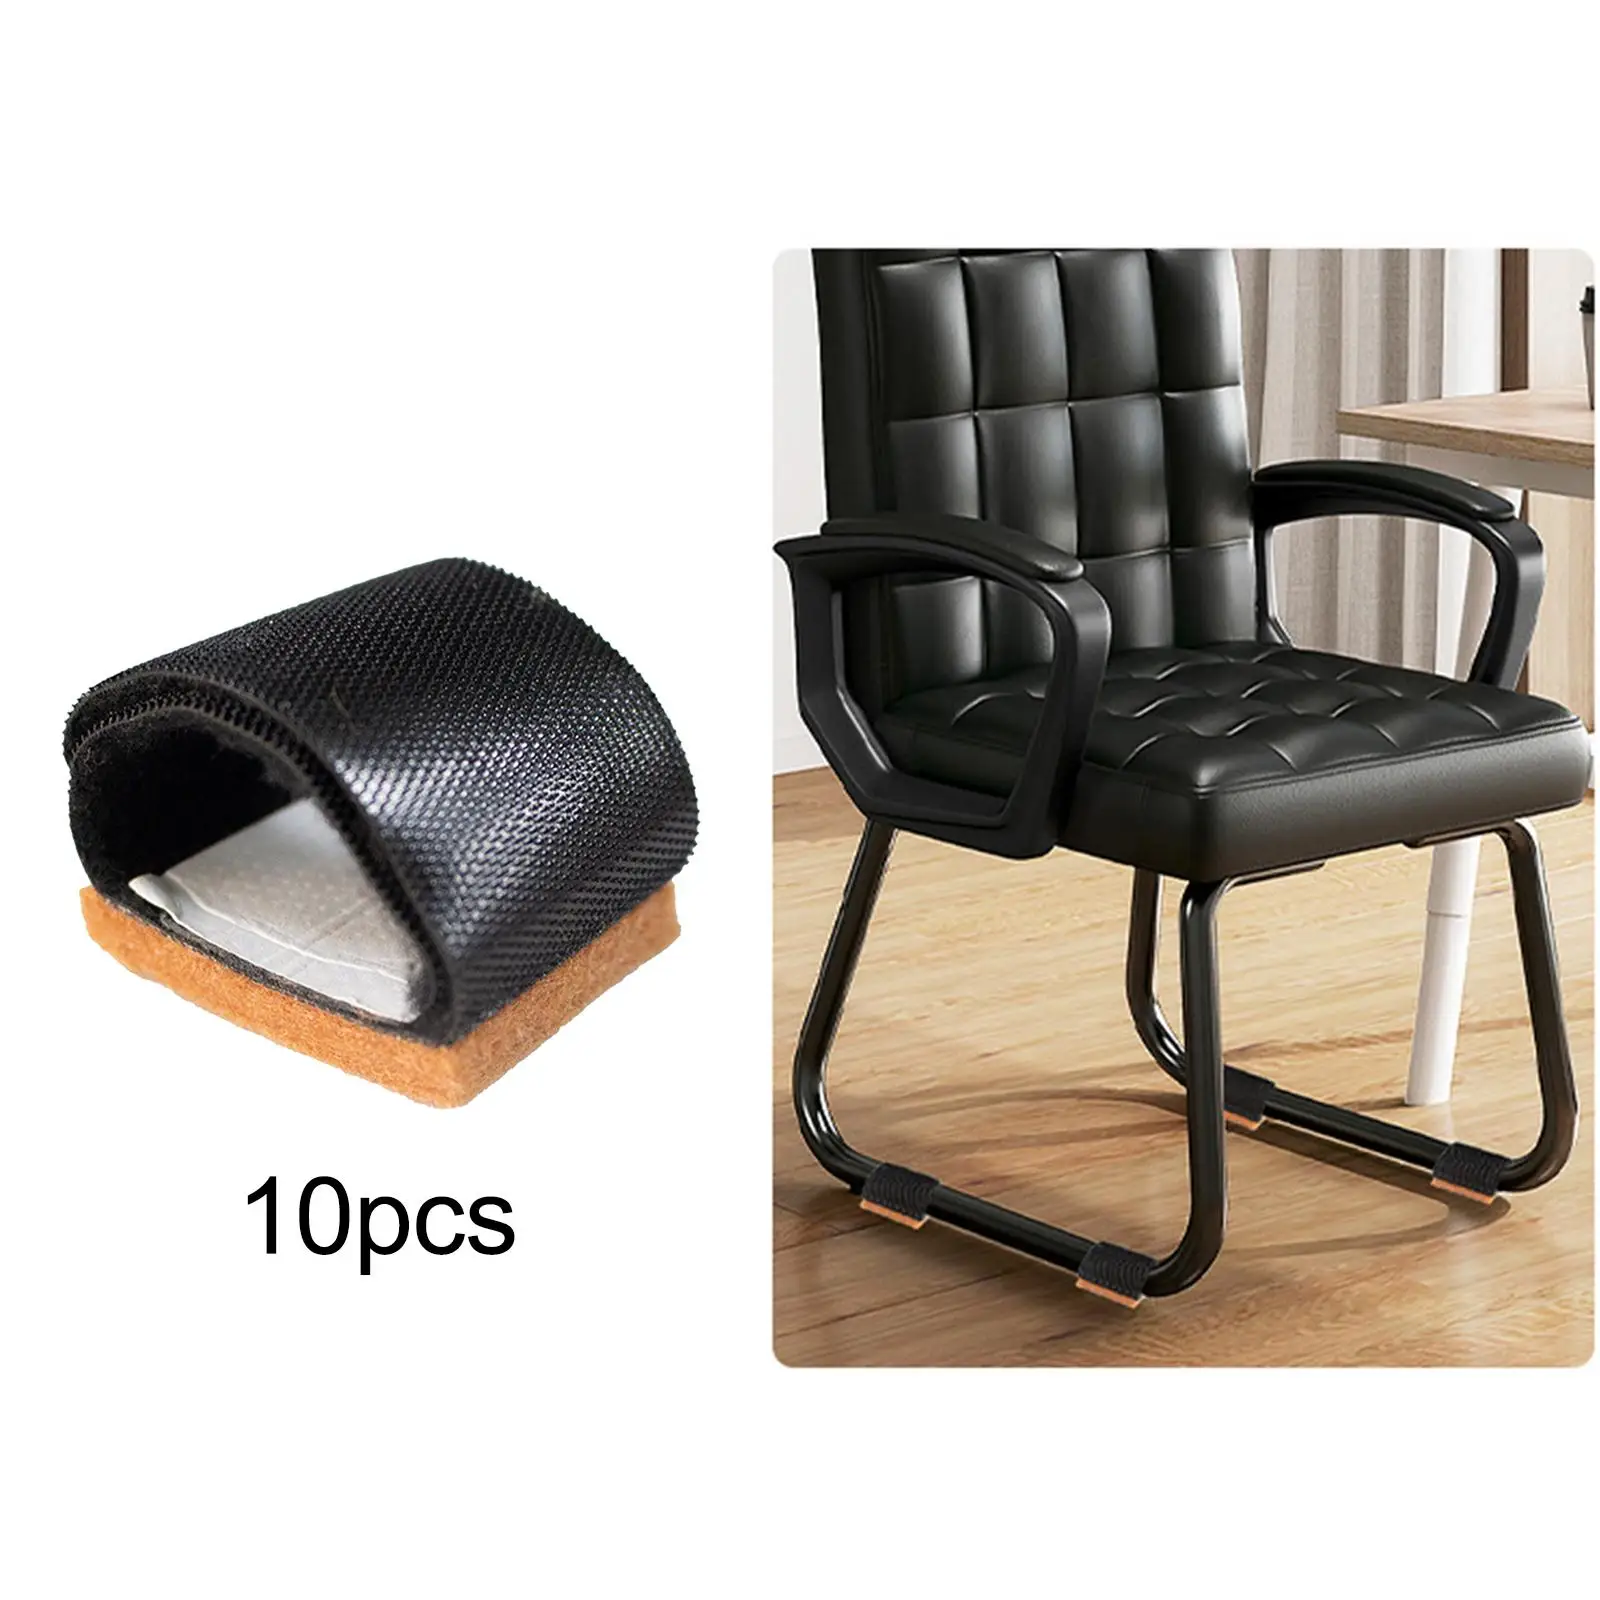 10Pcs Rocking Chair Foot Pad Reclining Chair Pad Adjustable Chair Leg Cover Furniture Leg Pad for Office Office Patio Home Accs